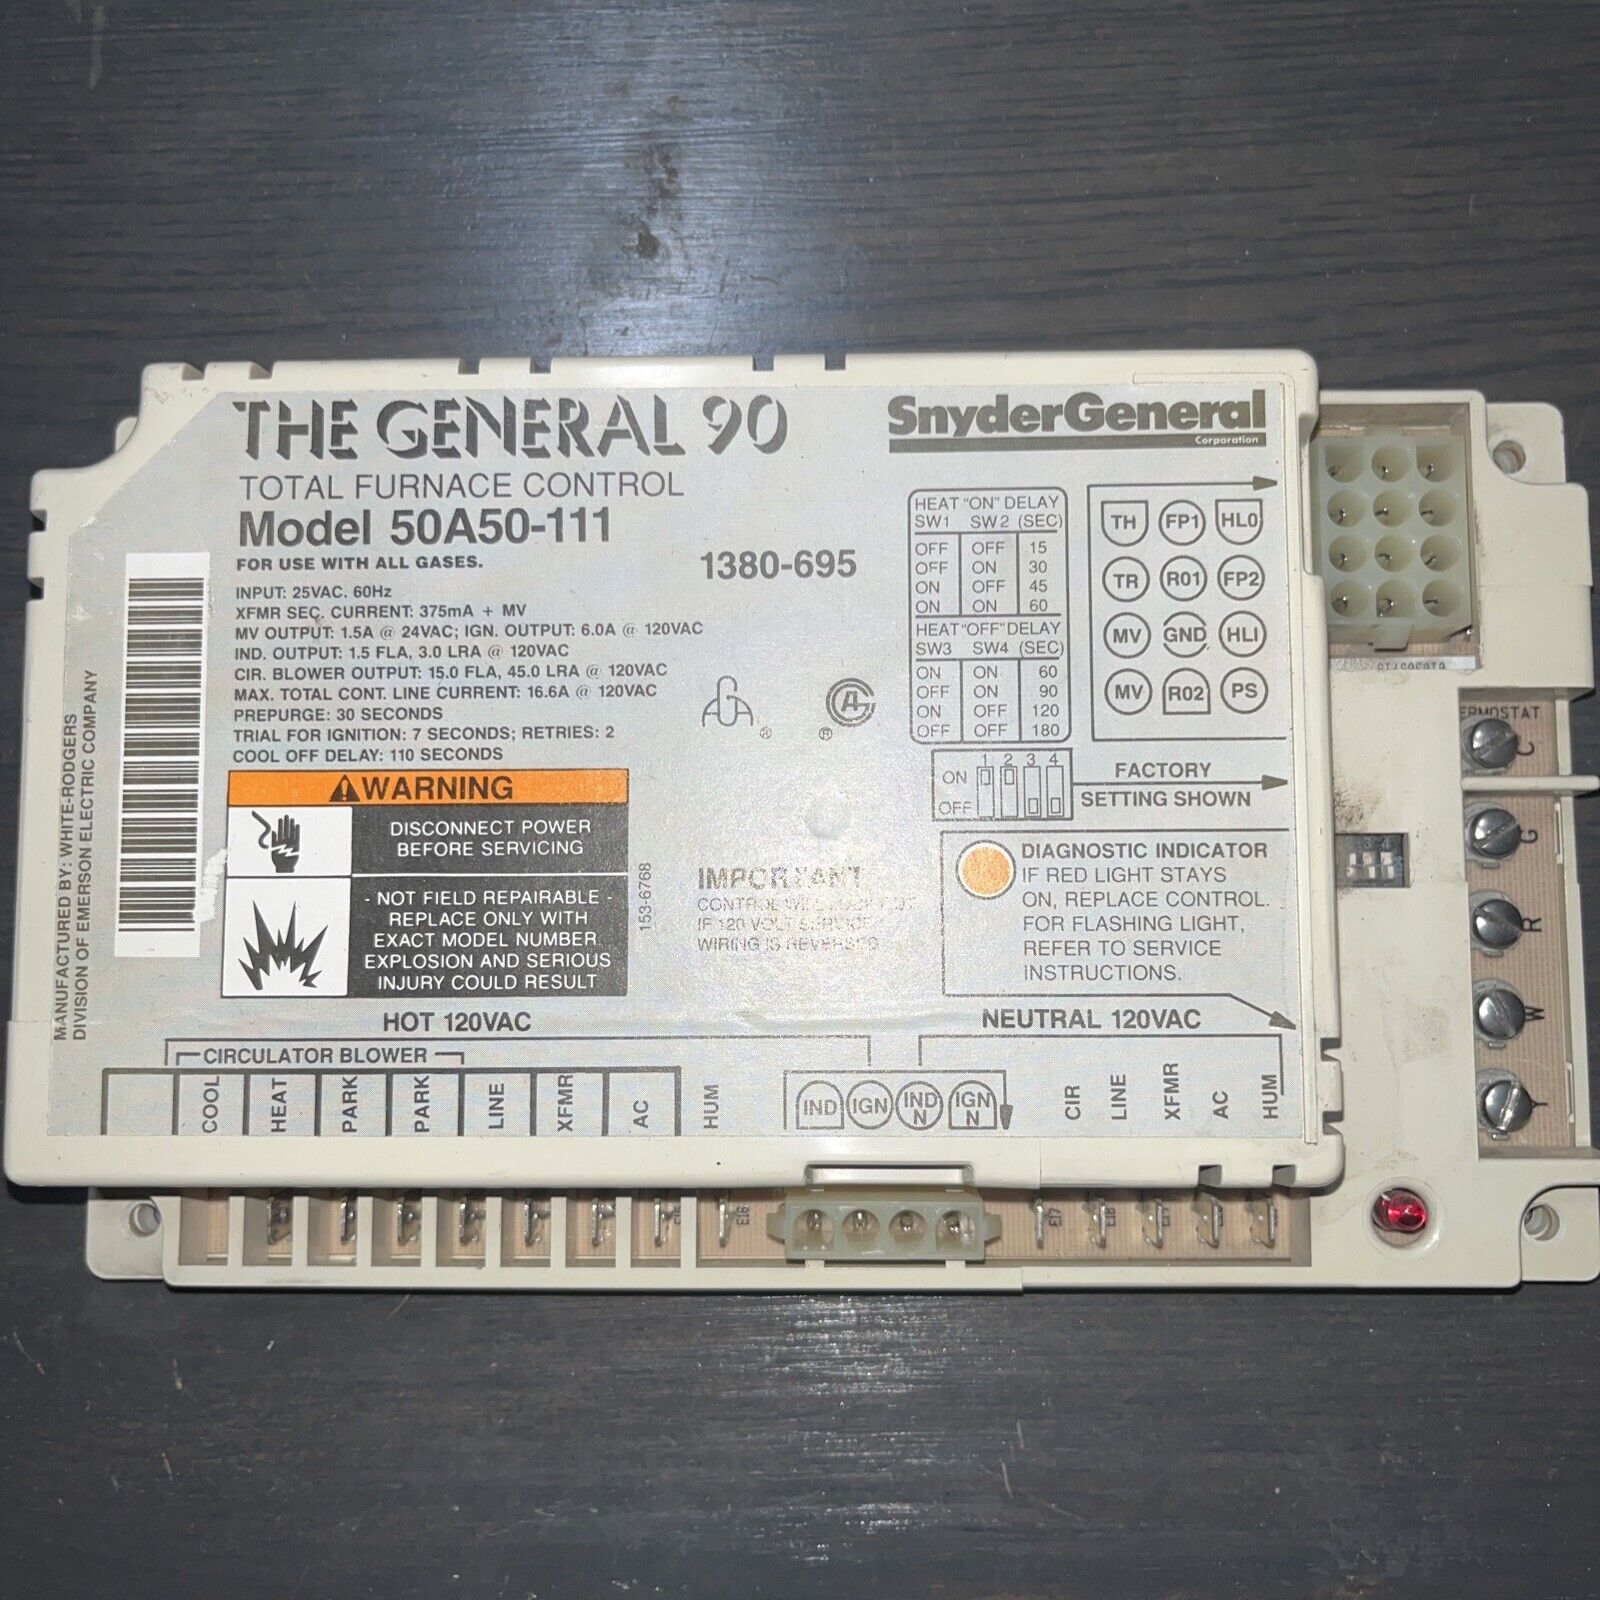 White Rodgers 50A50-111 Furnace Control Circuit Board 1380-695 THE GENERAL 90